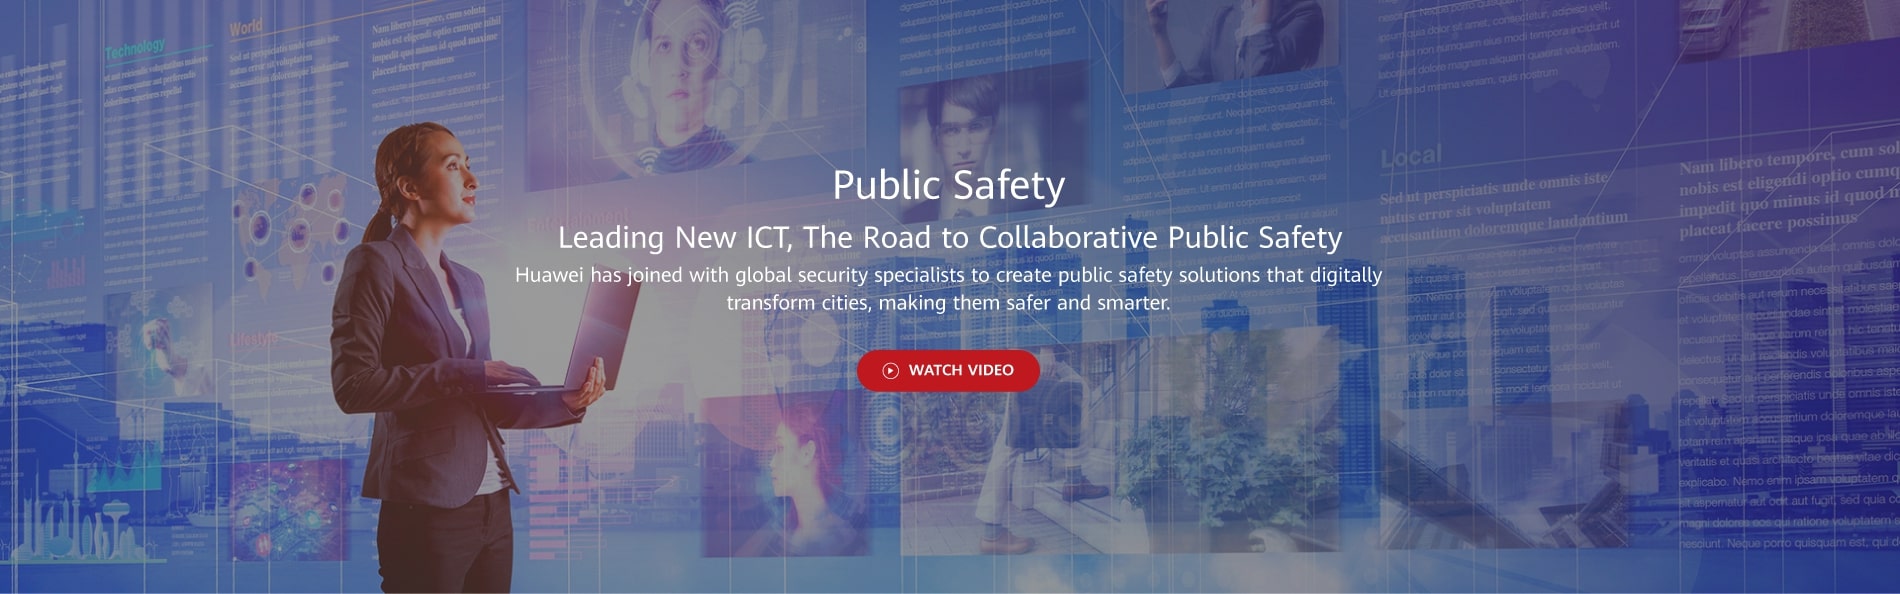 Huawei Public Safety Banner